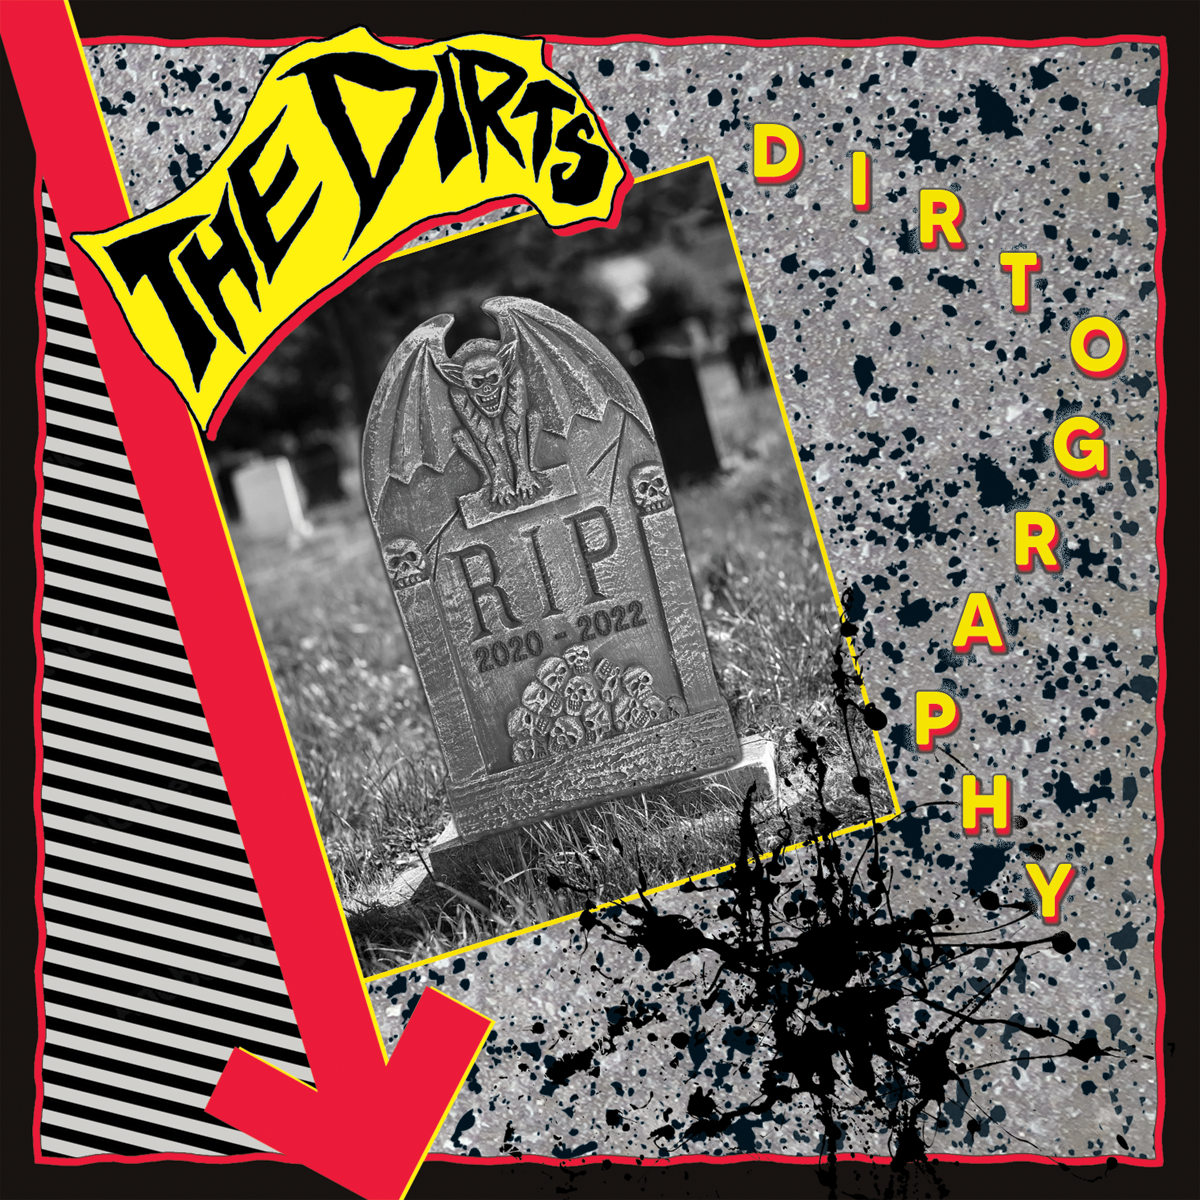 The Dirts- Dirtography CD ~25 SONG REISSUE W/ 2 UNRELEASED BONUS TRACKS!